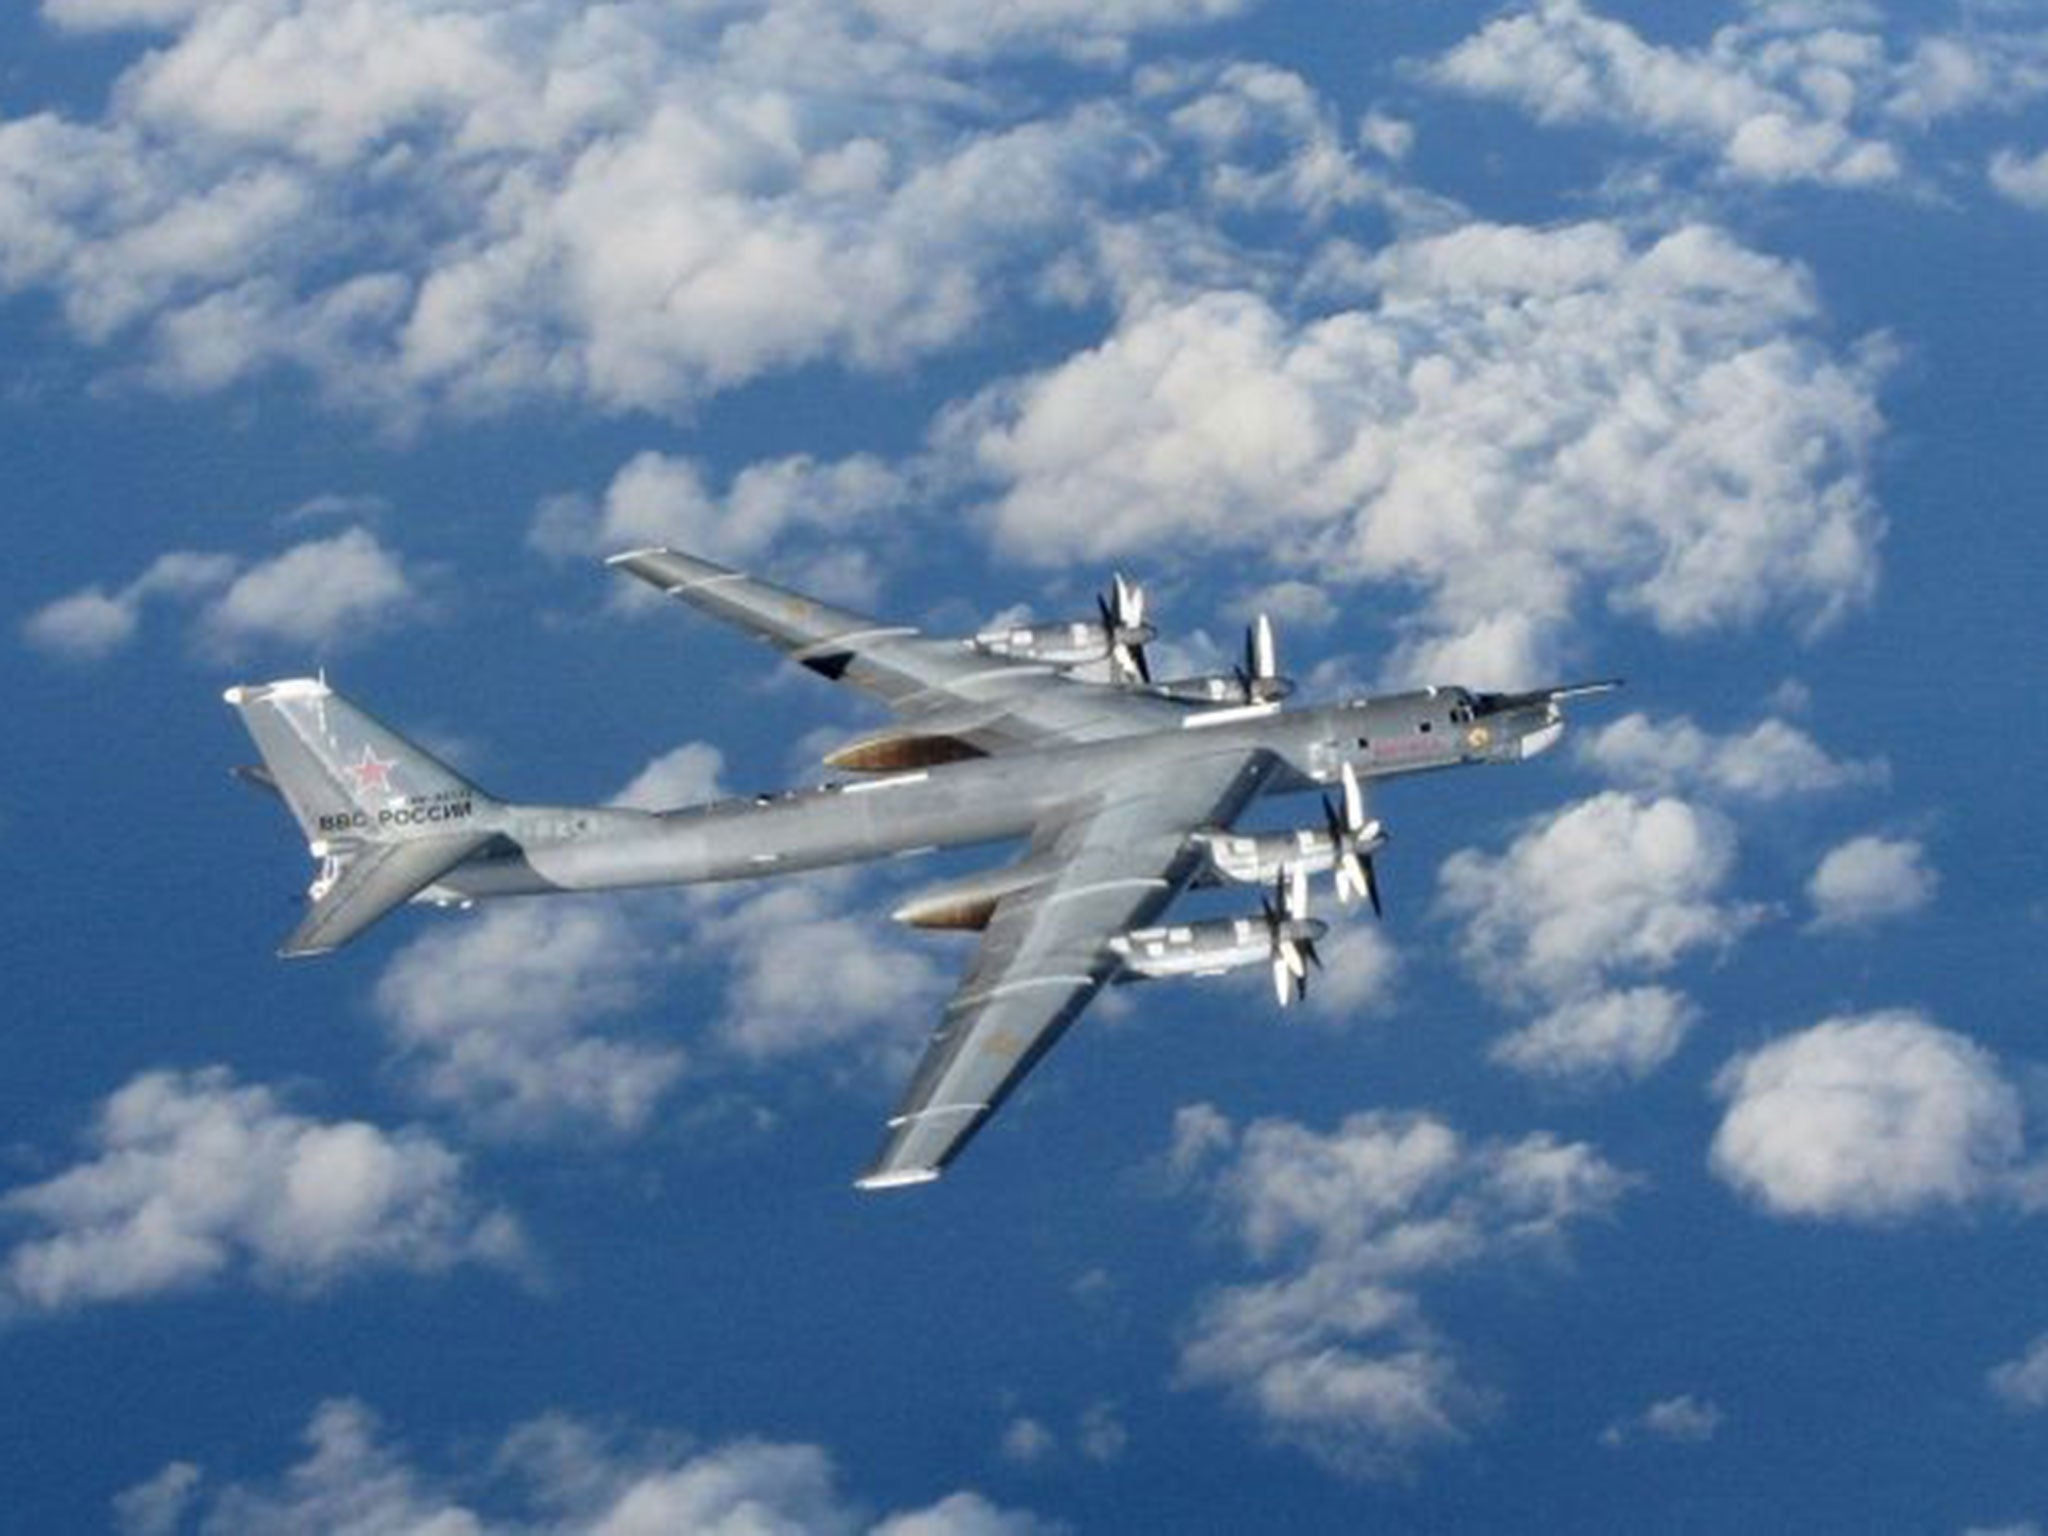 A Russian Bear 'H' aircraft photographed from an intercepting RAF Typhoon near UK airspace